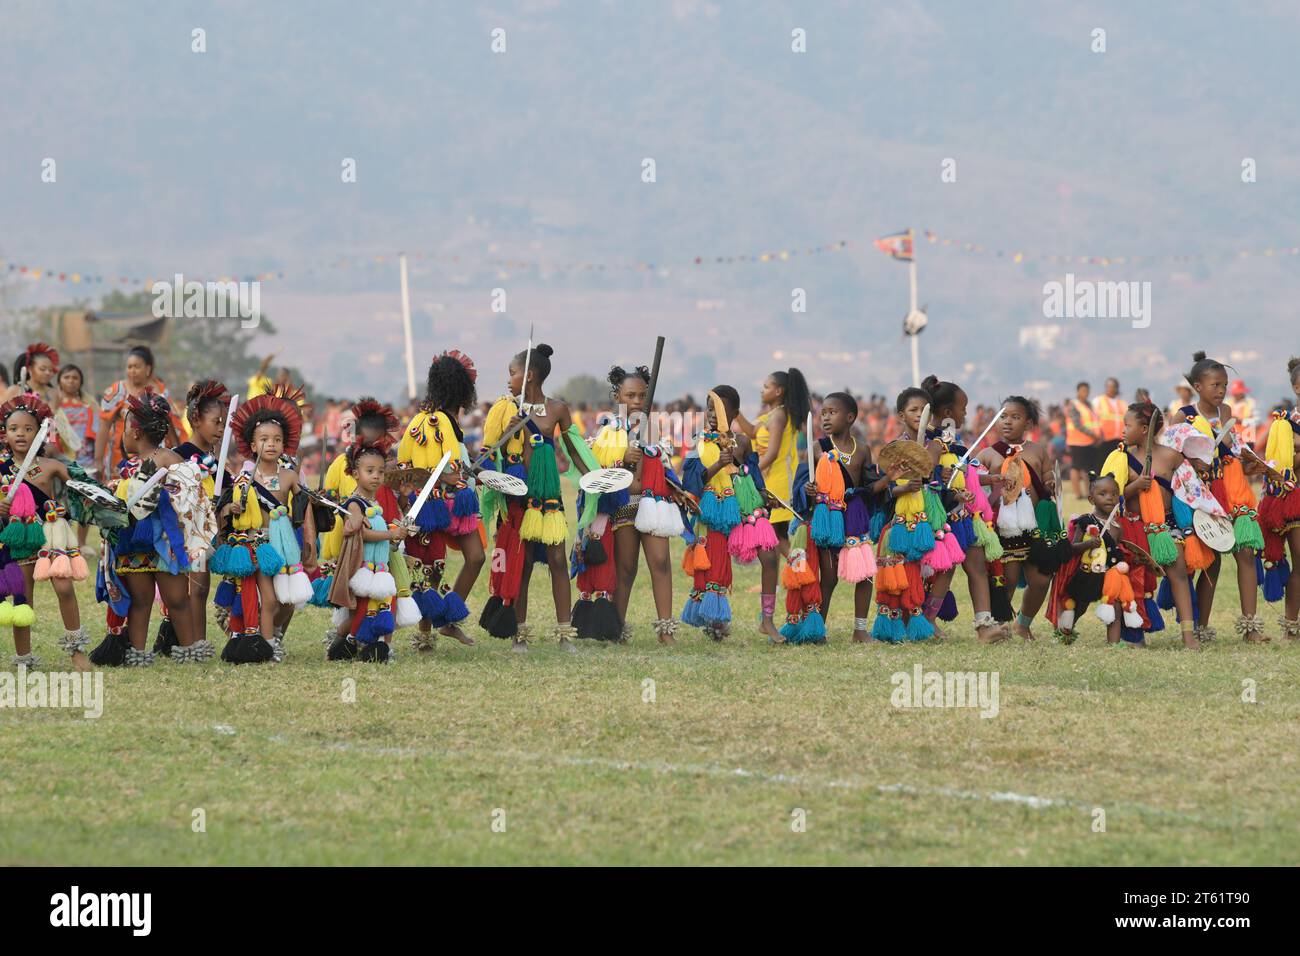 Row of young girls in traditional dress at Umhlanga reed dance festival 2023, Kingdom of Eswatini, group of children dancing, culture activity Stock Photo